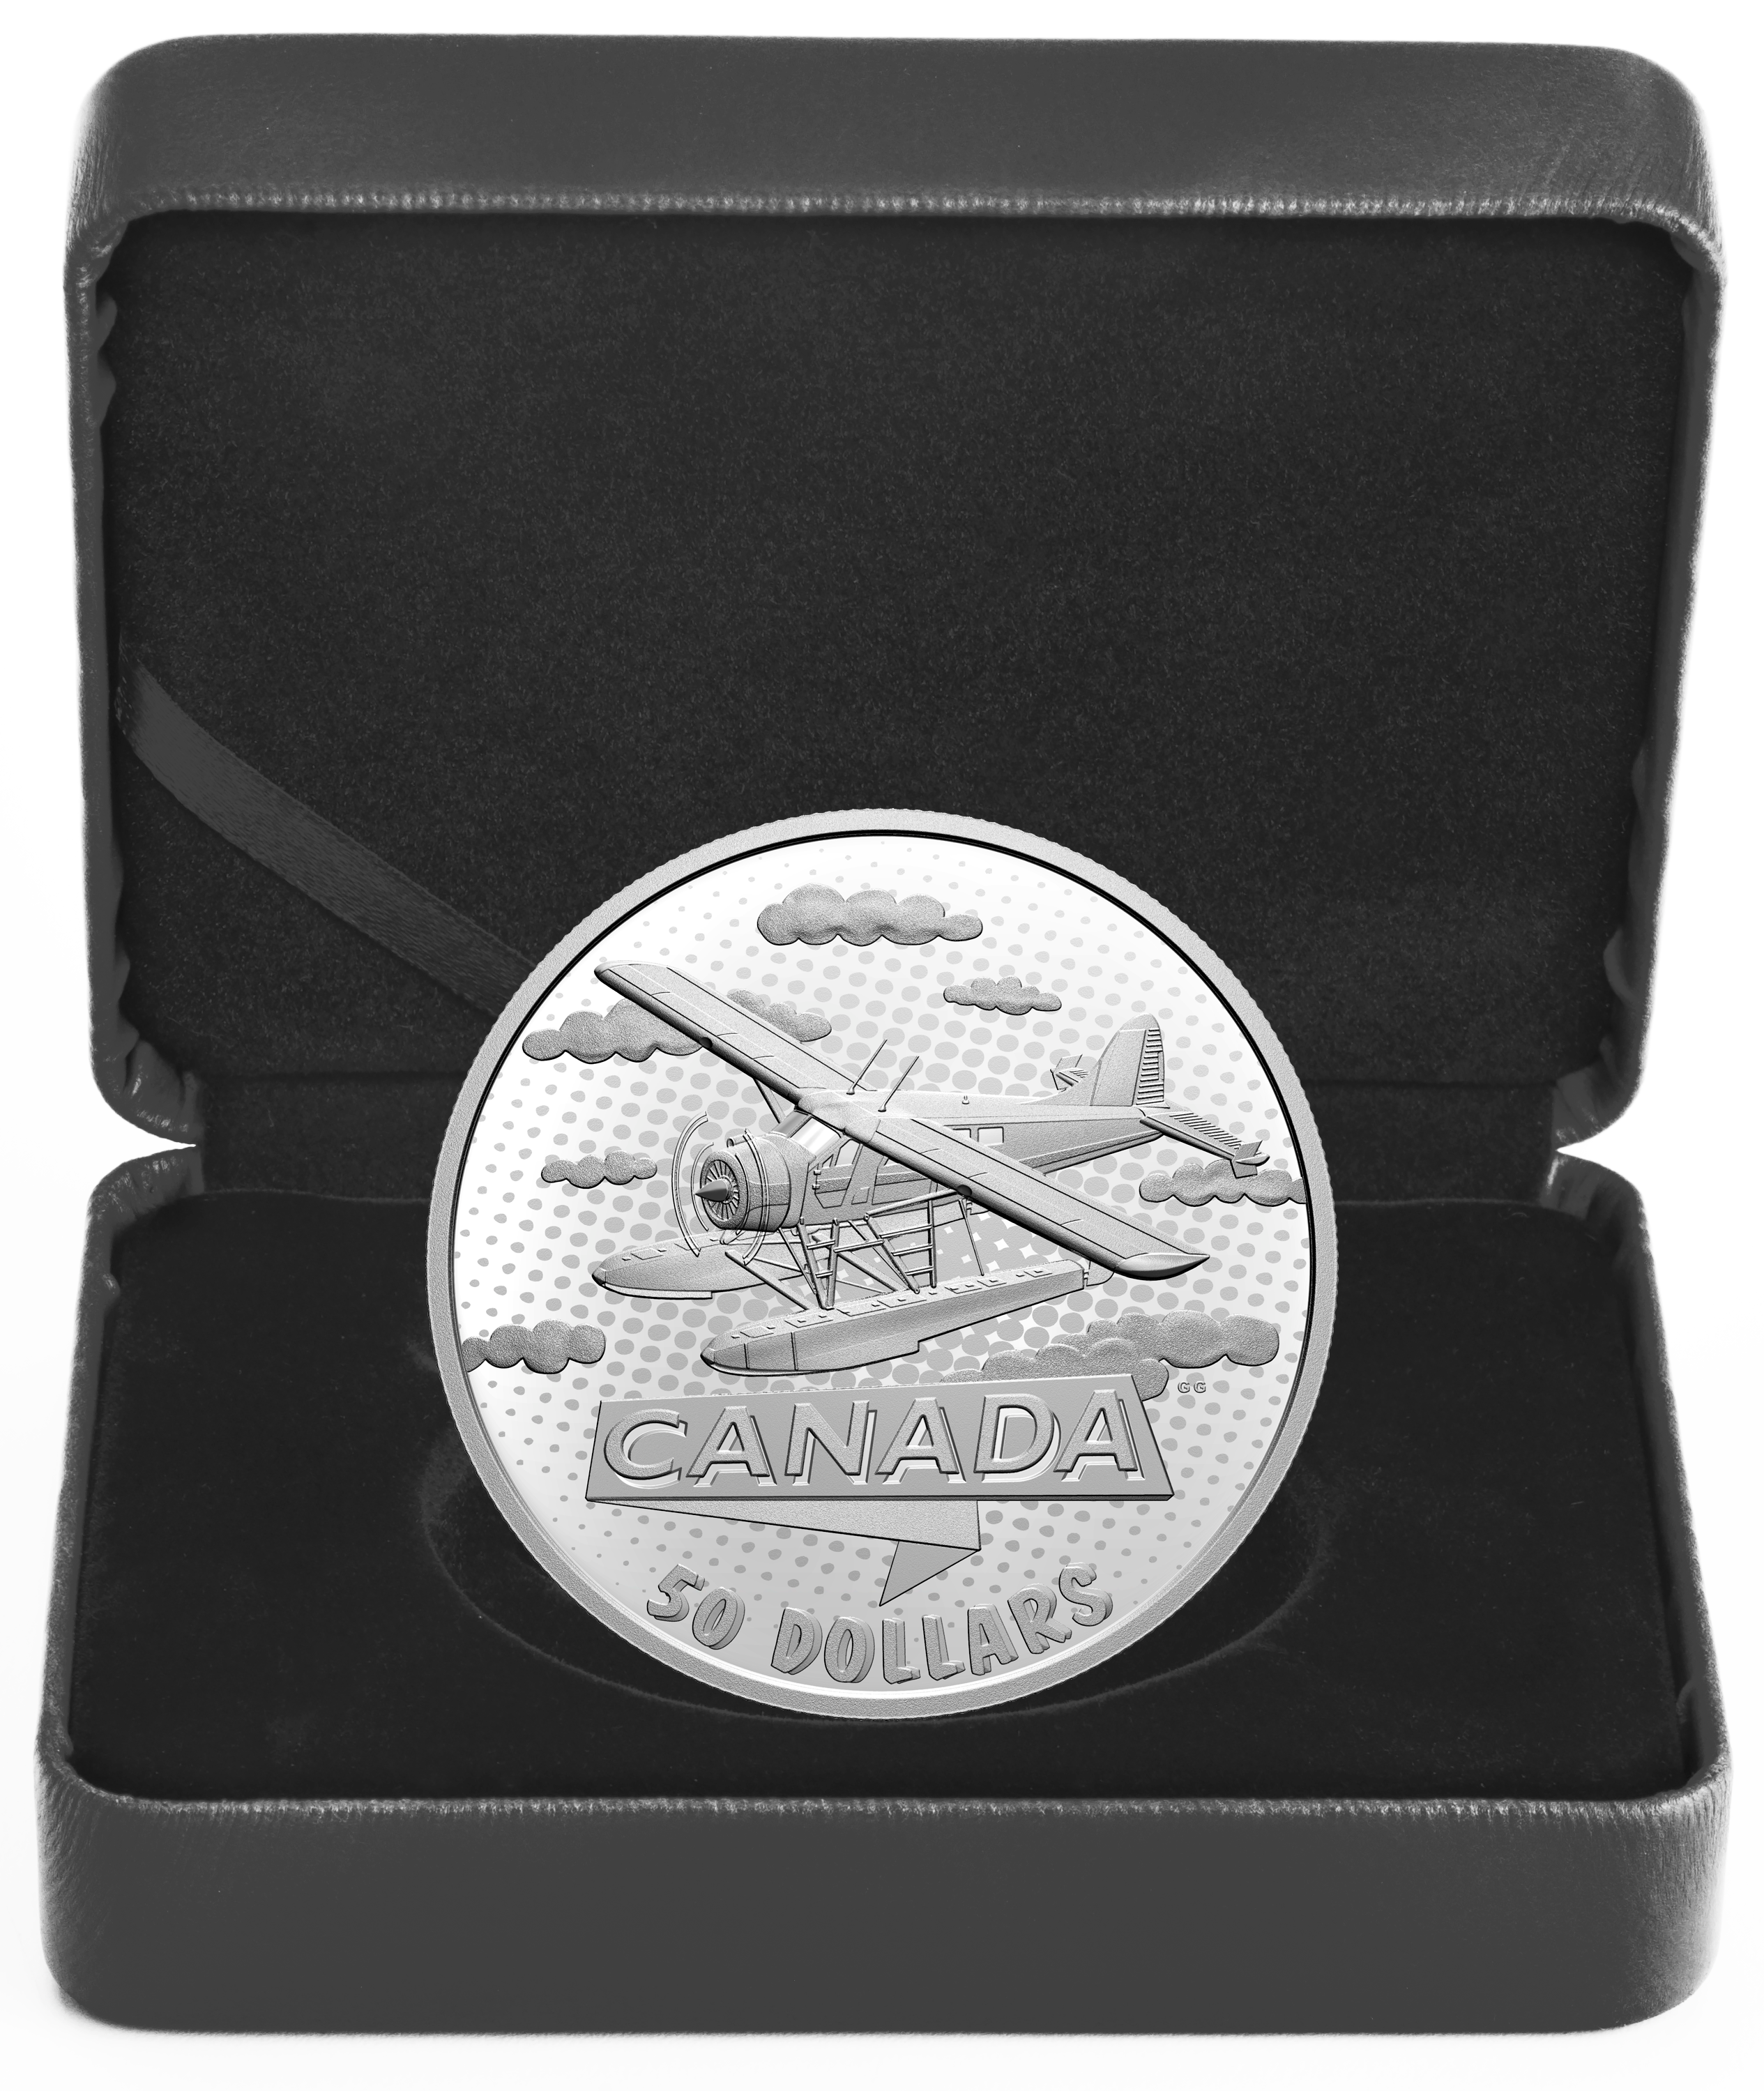 CANADA TAKES WING FIRST 100 YEARS OF CONFEDERATION Silver Coin $50 Canada 2021